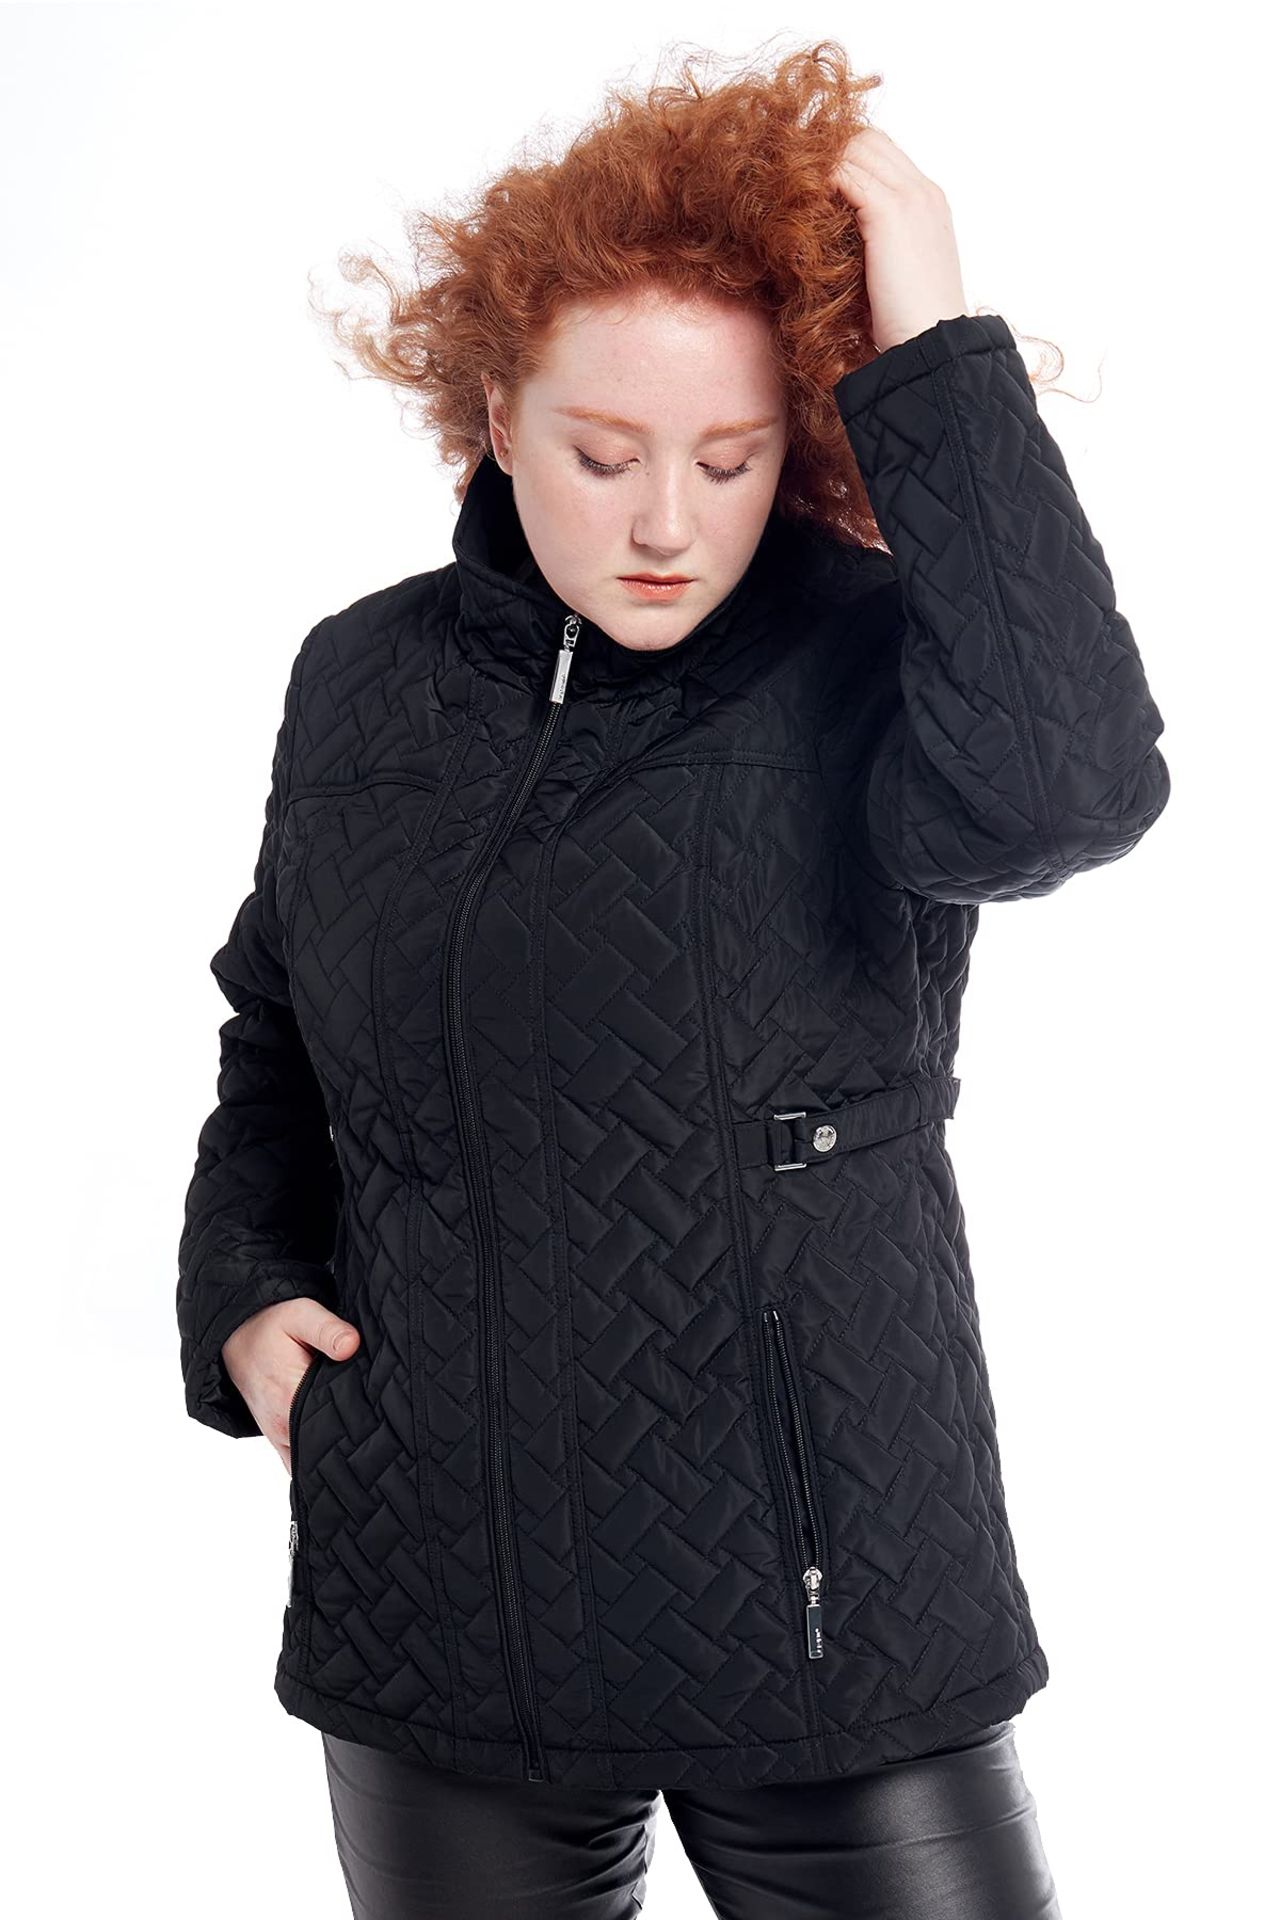 RRP £54.79 S P Y M Womens Diamond Quilted Jacket Lightweight Padding Coat with Pockets